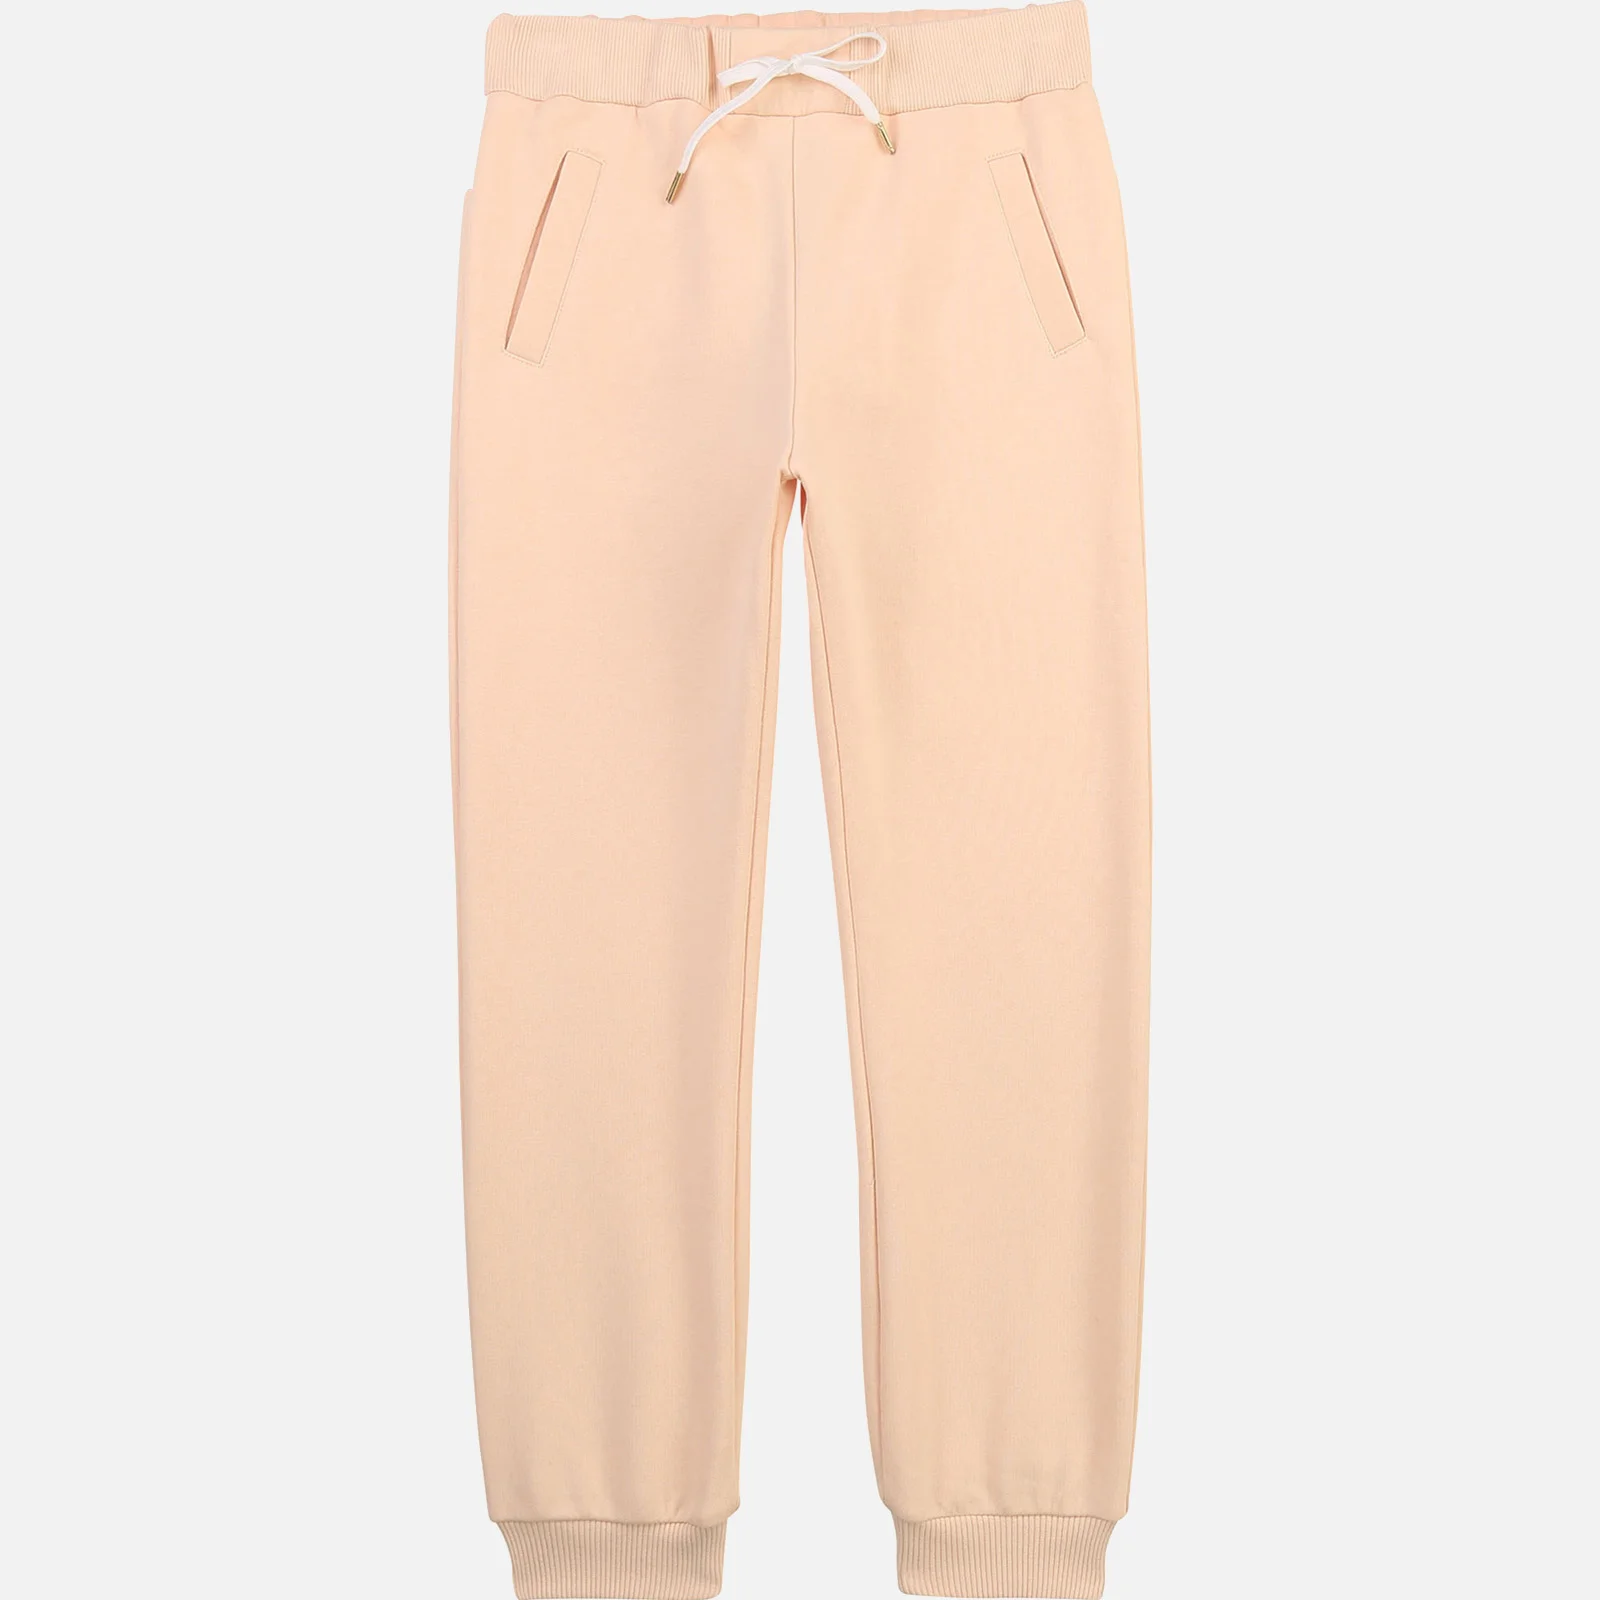 Chloé Girls' Sweatpant Trousers - Pale Pink Image 1